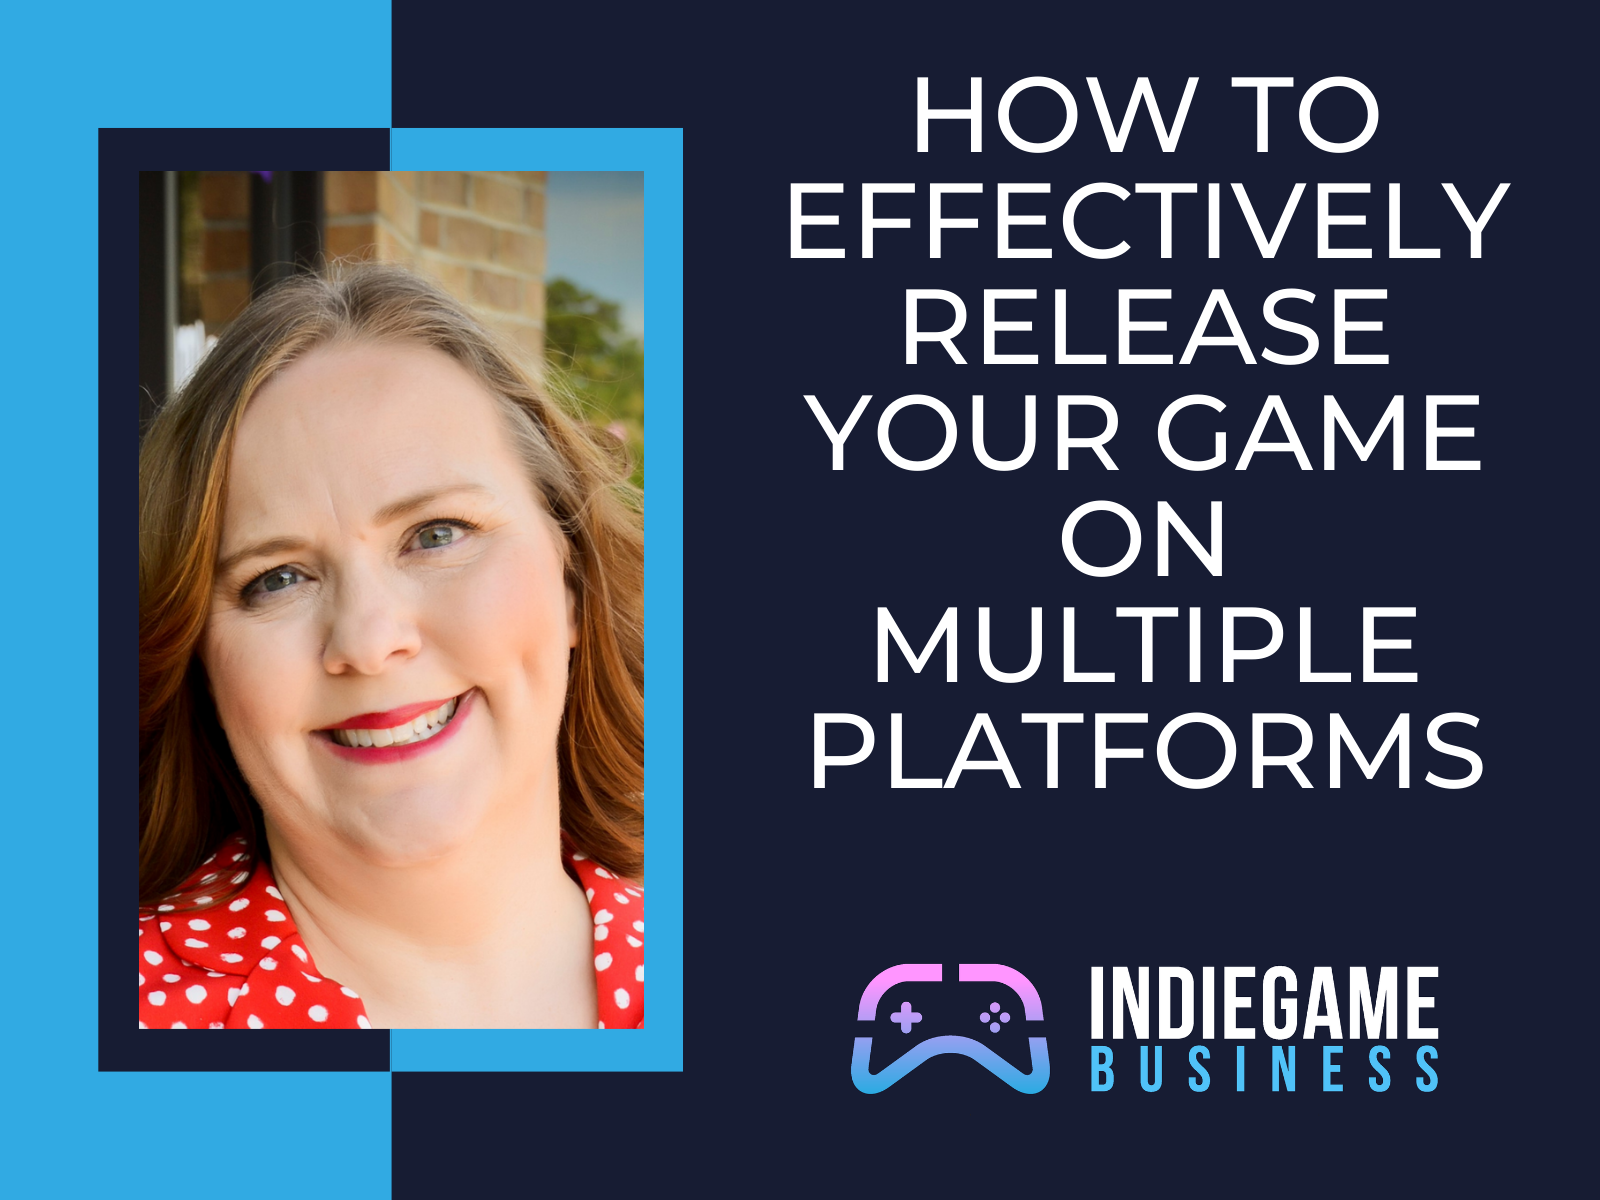 How To Effectively Release Your Game On Multiple Platforms